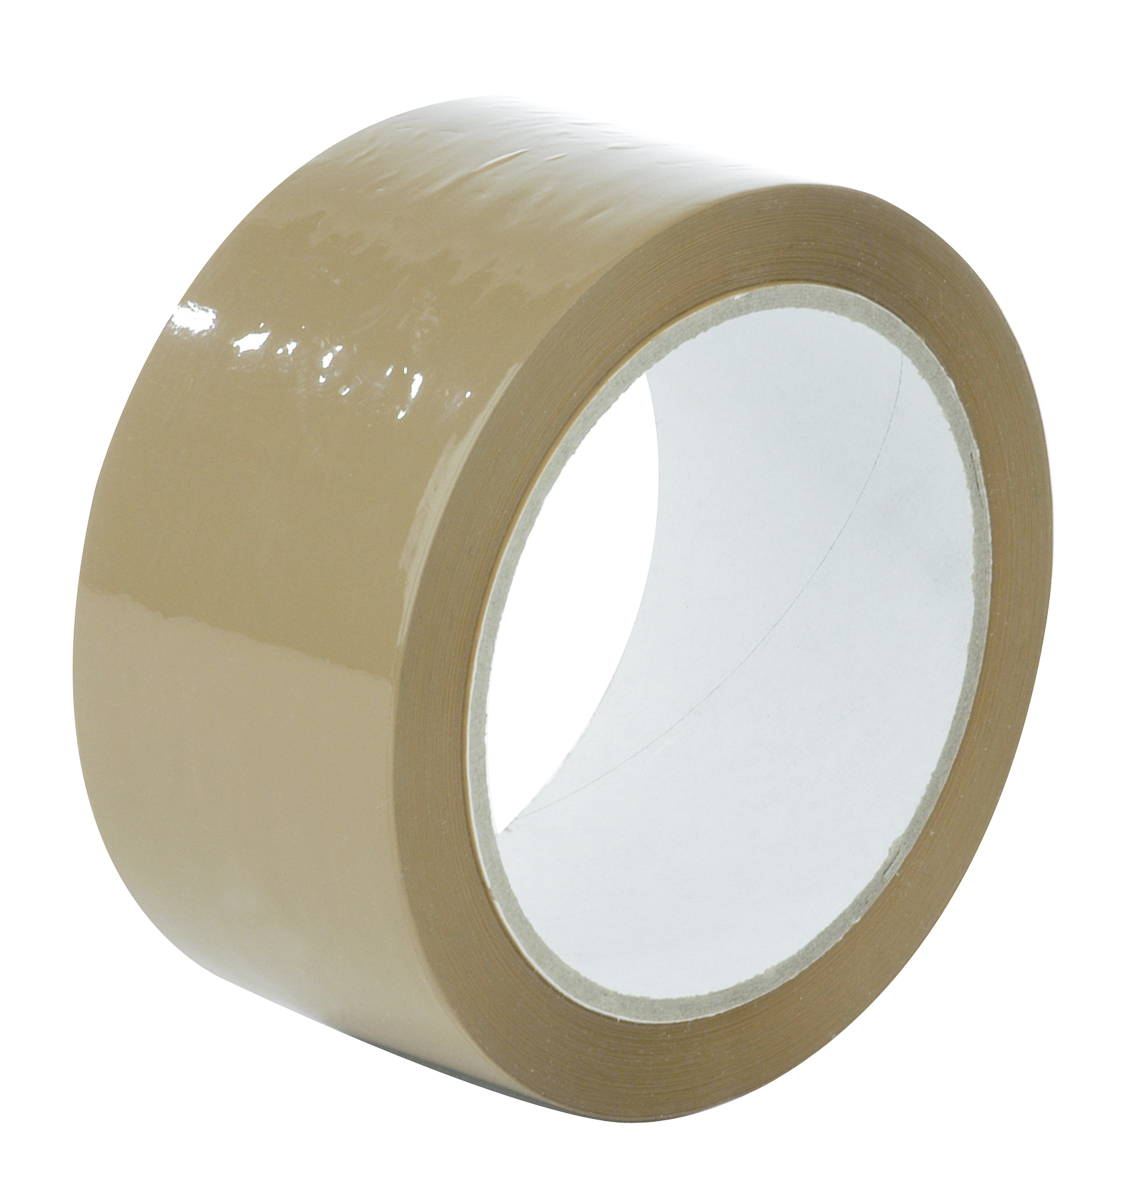 LONG LENGTH TAPE STRONG CLEAR BROWN FRAGILE 48MM x 66M PACKING PARCEL TAPE 